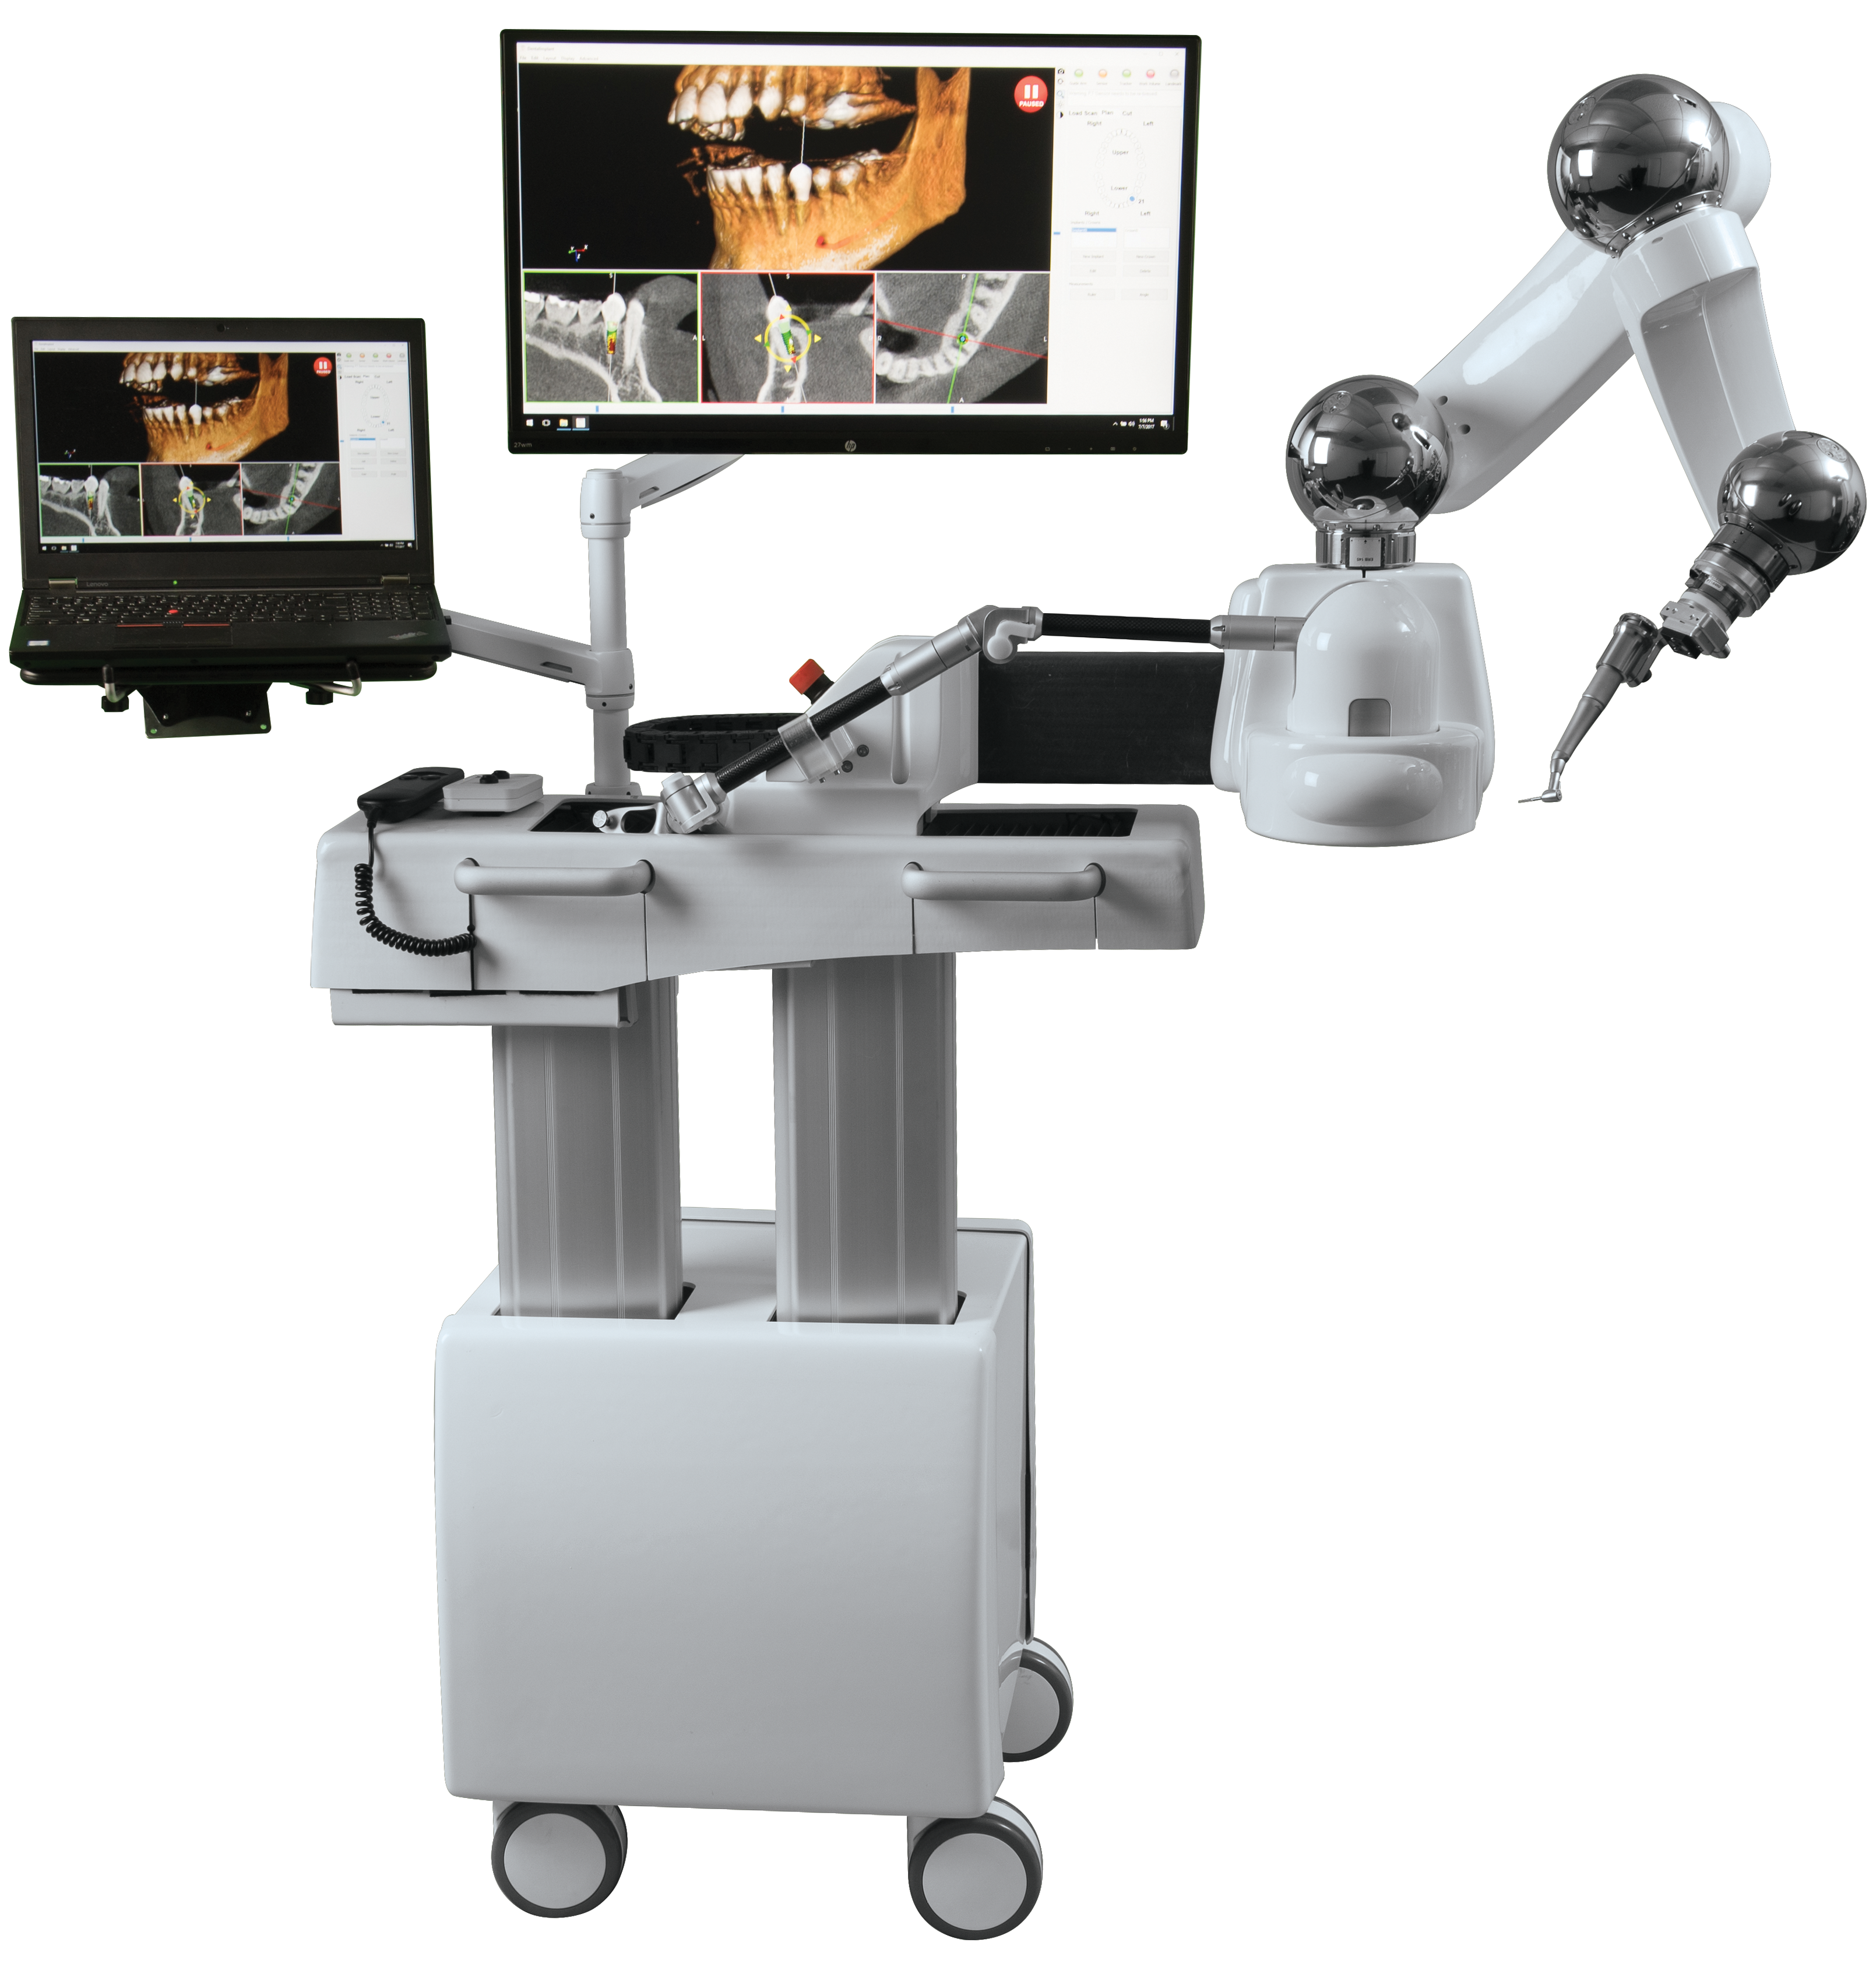 How to Achieve Accurate Implant Placement Using Robotic Guidance